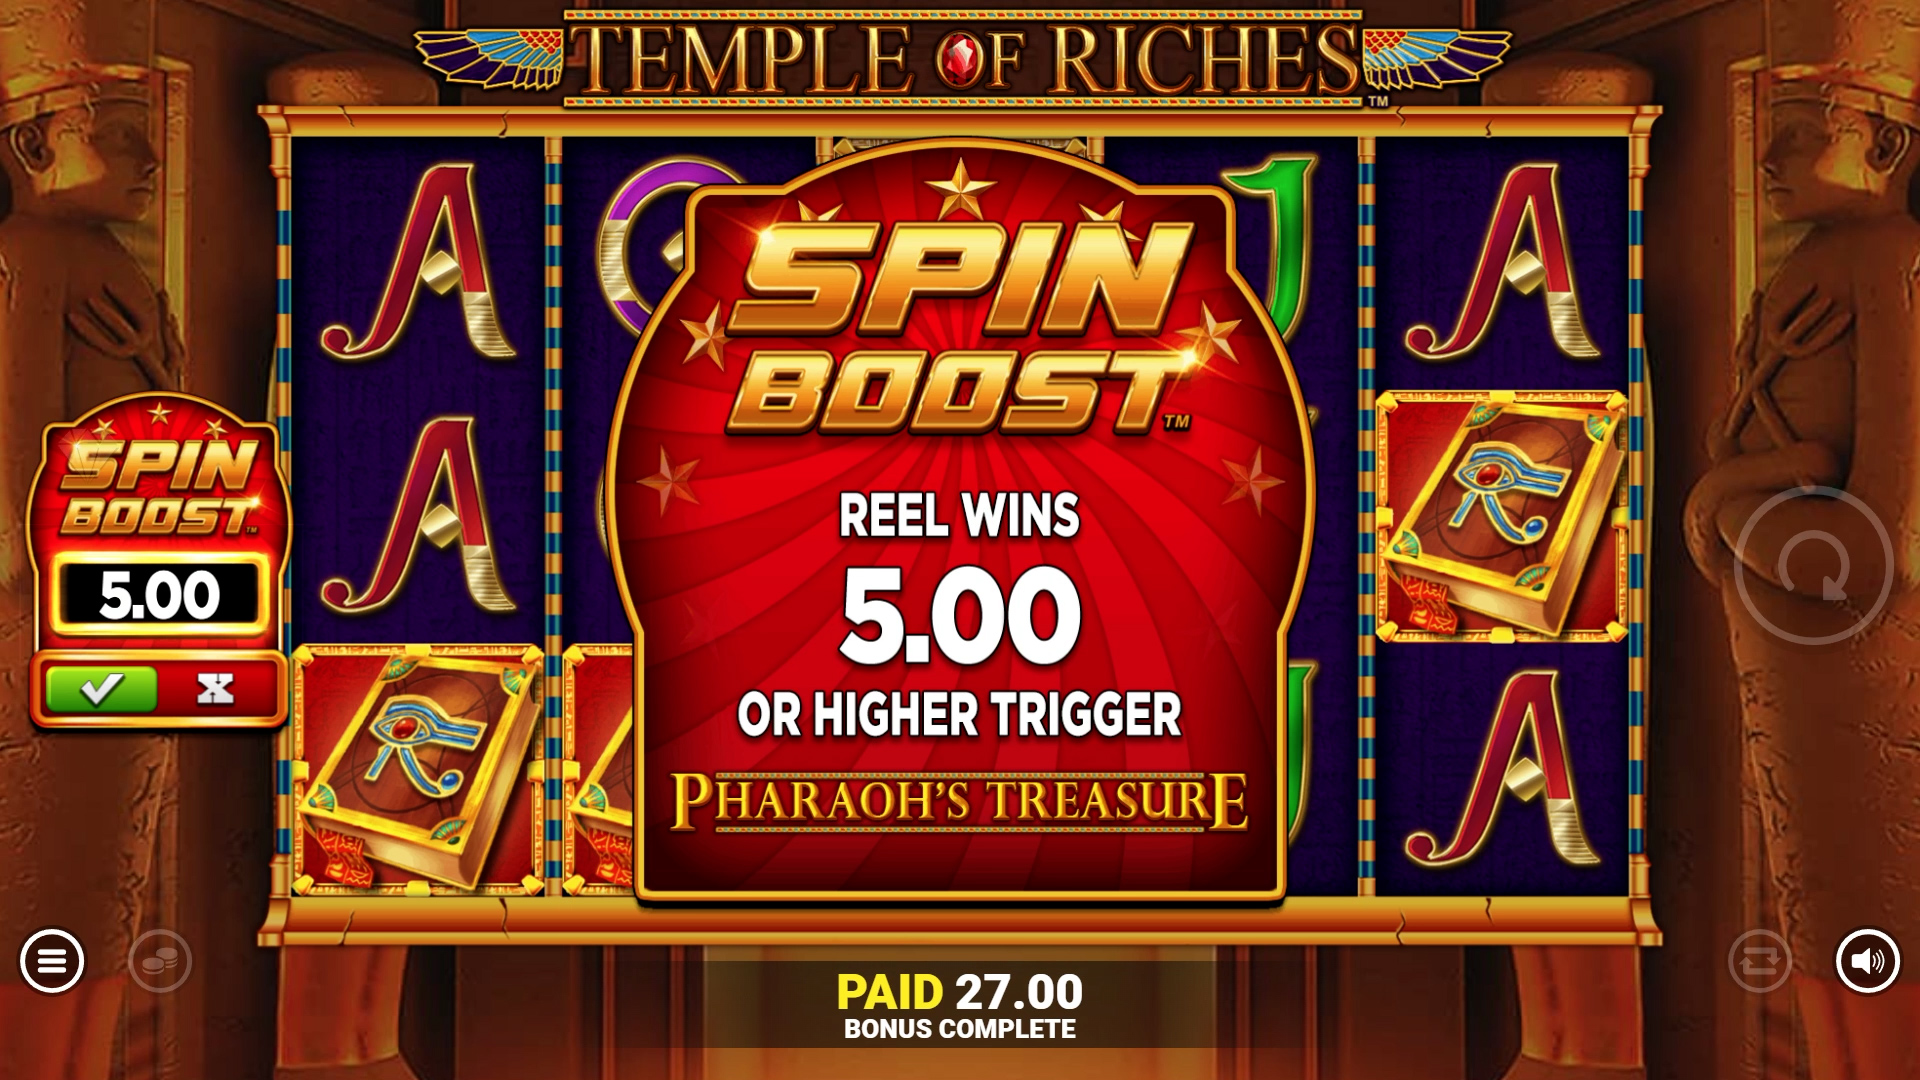 TEMPLE OF RICHES SPIN BOOST